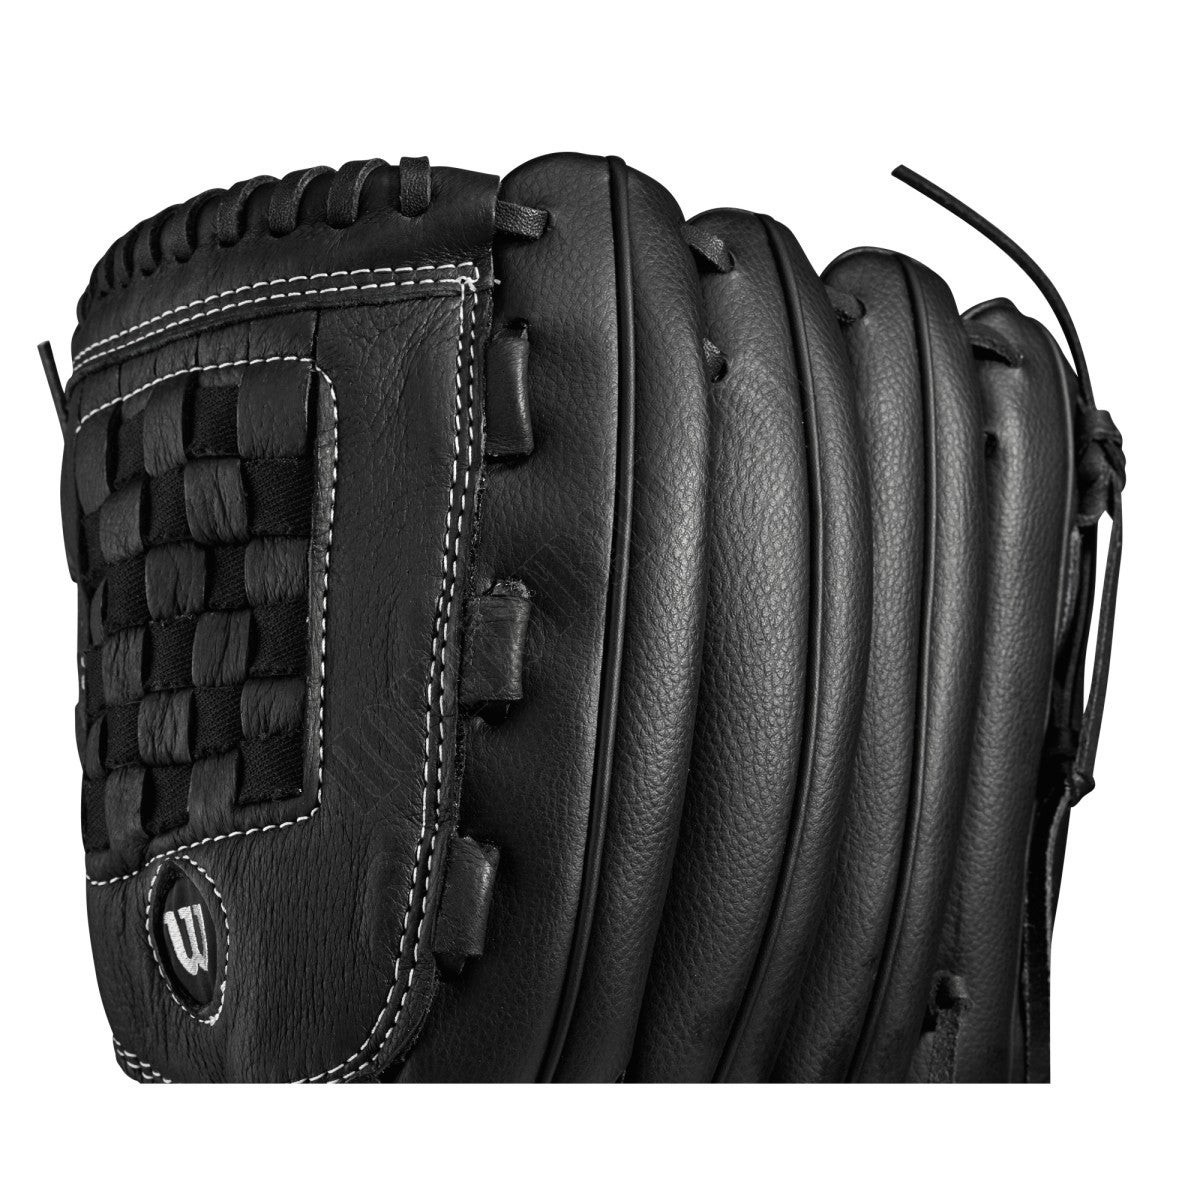 A360 14" Slowpitch Glove - Left Hand Throw ● Wilson Promotions - -8